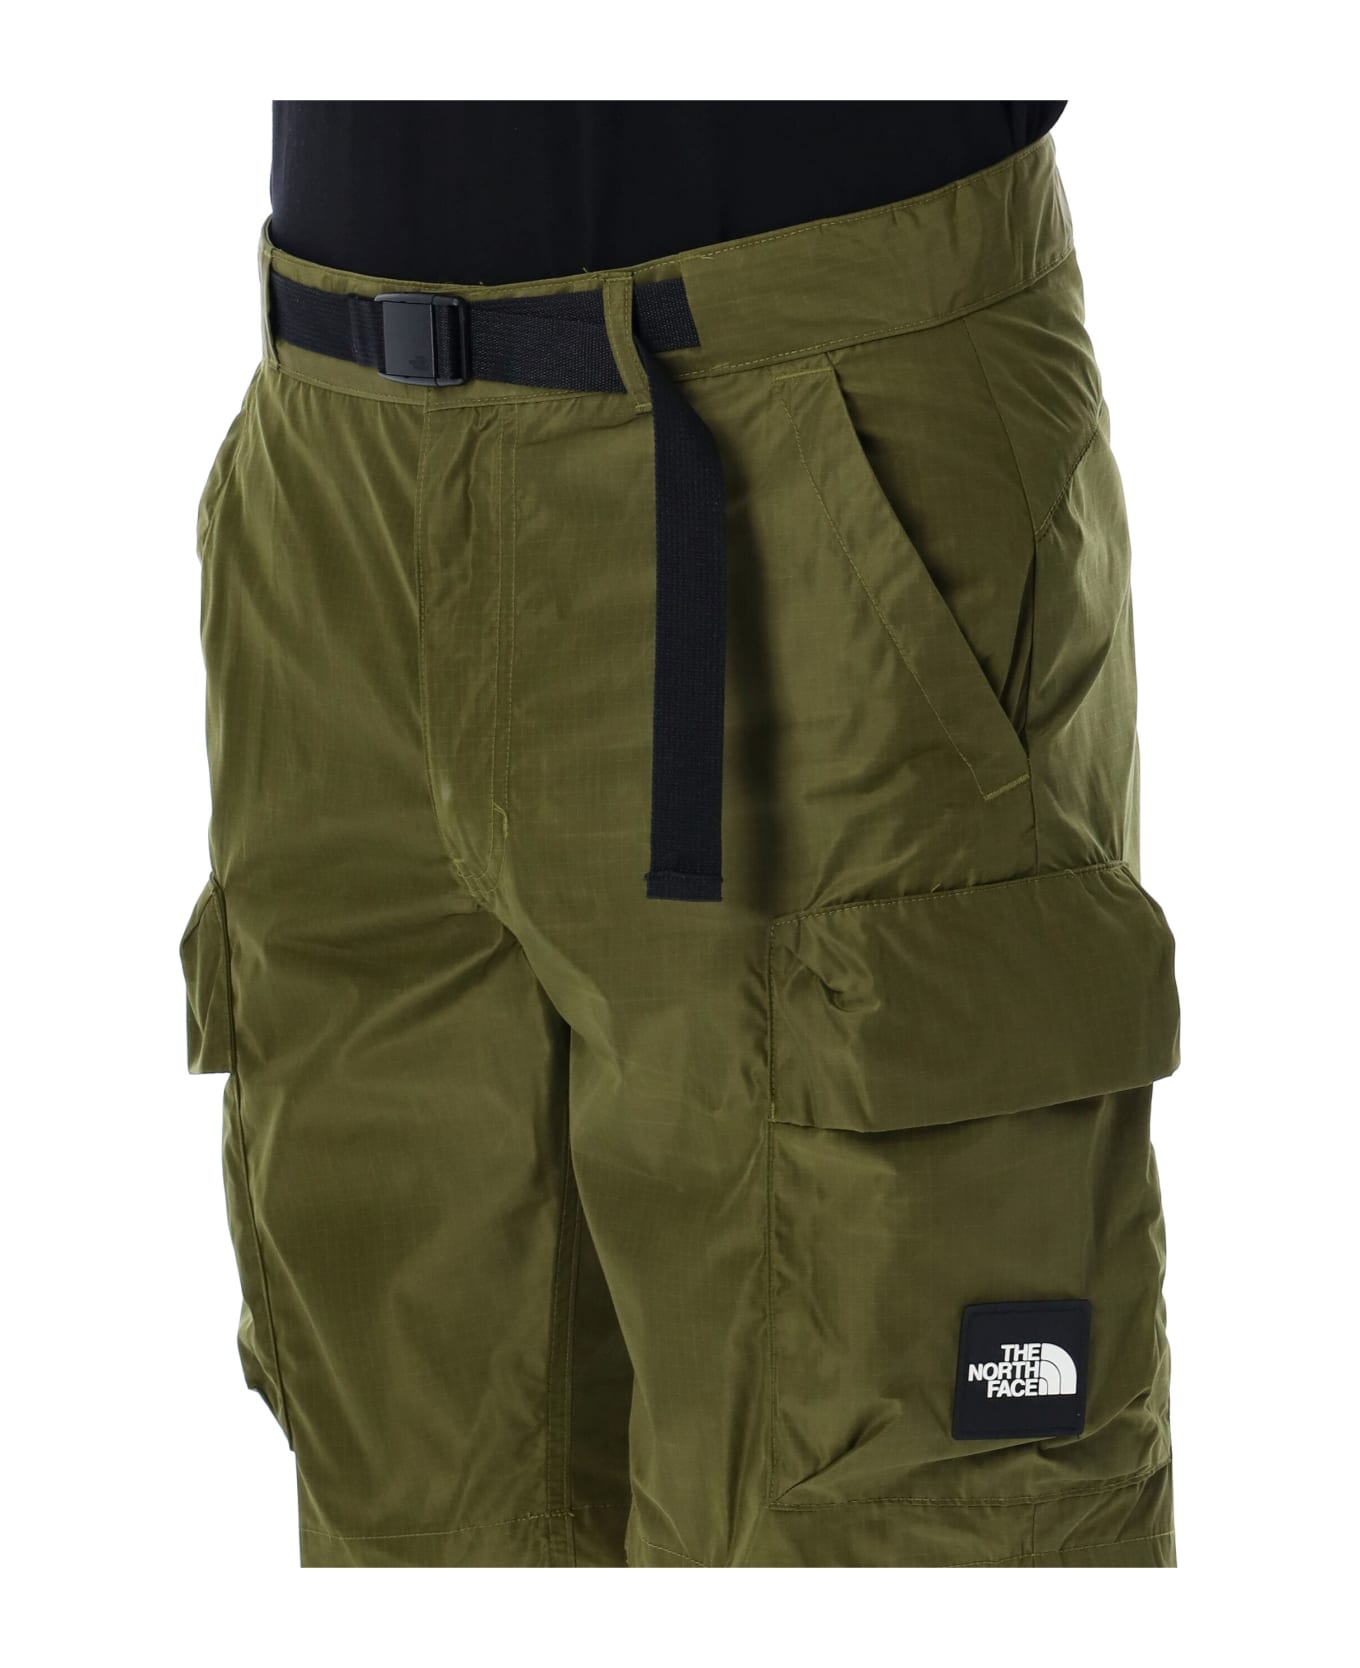 The North Face Nse Cargo Shorts - OLIVE ショートパンツ